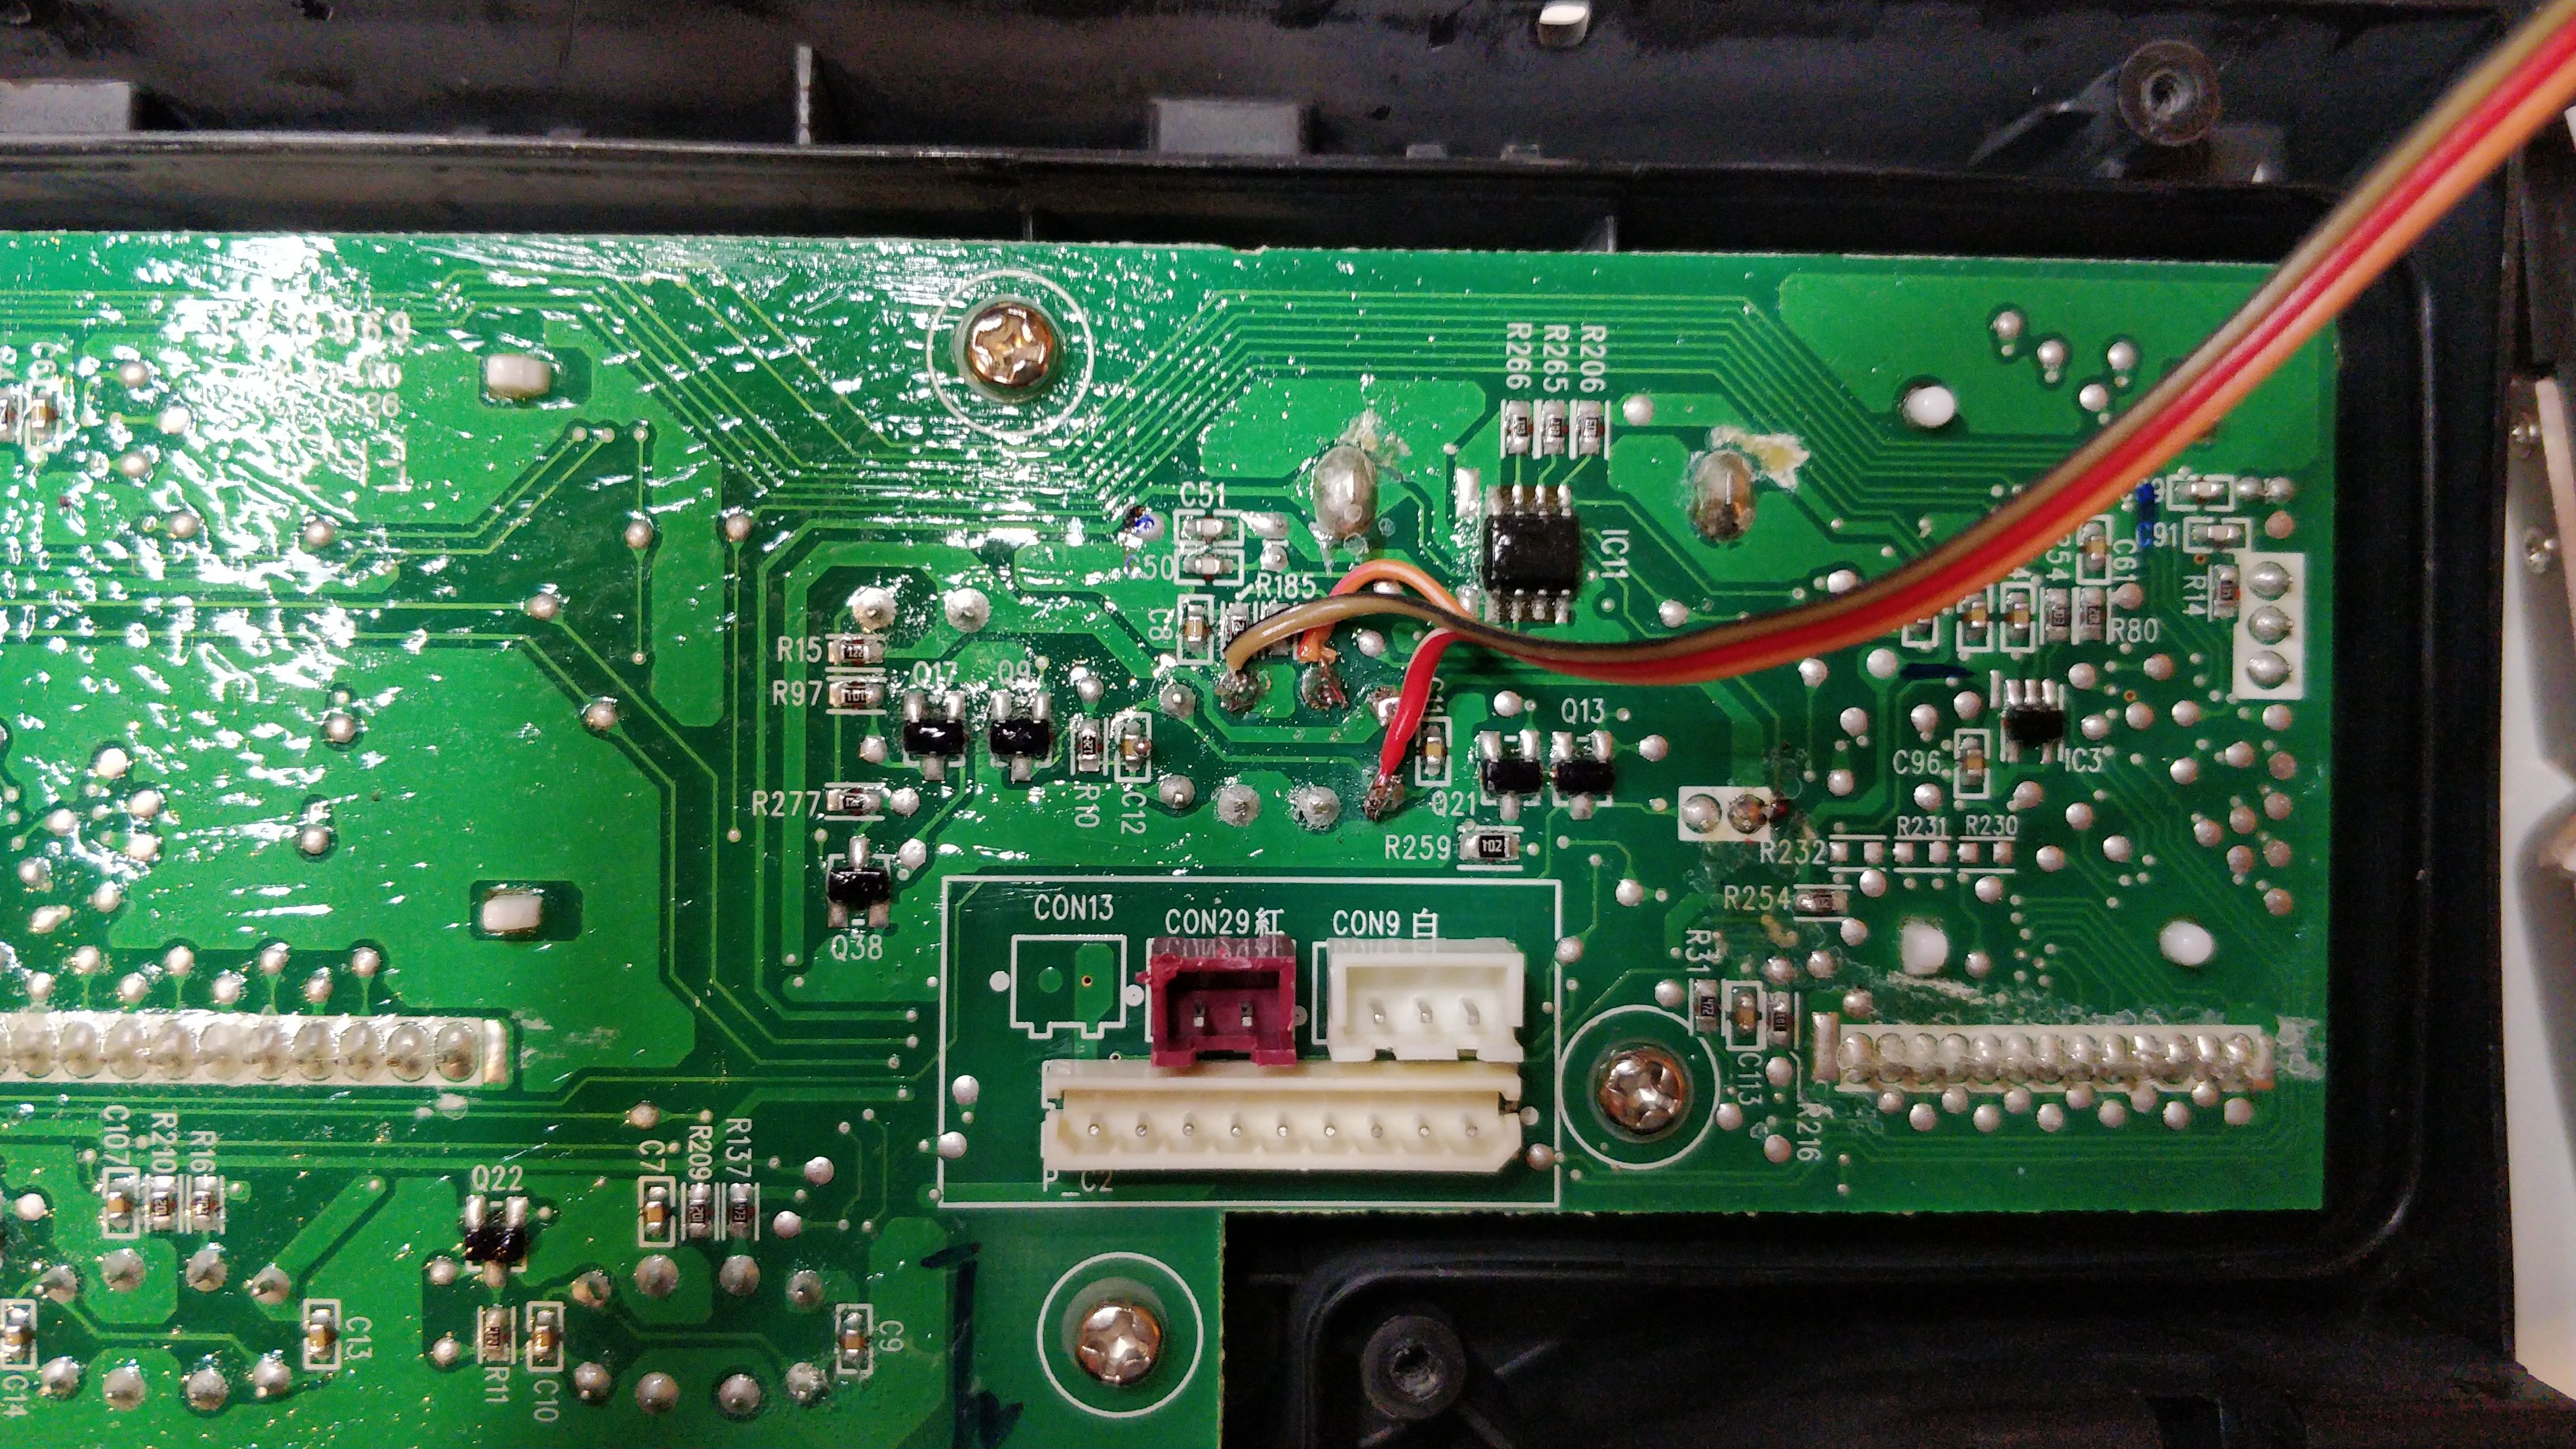 Wires attached to UI board